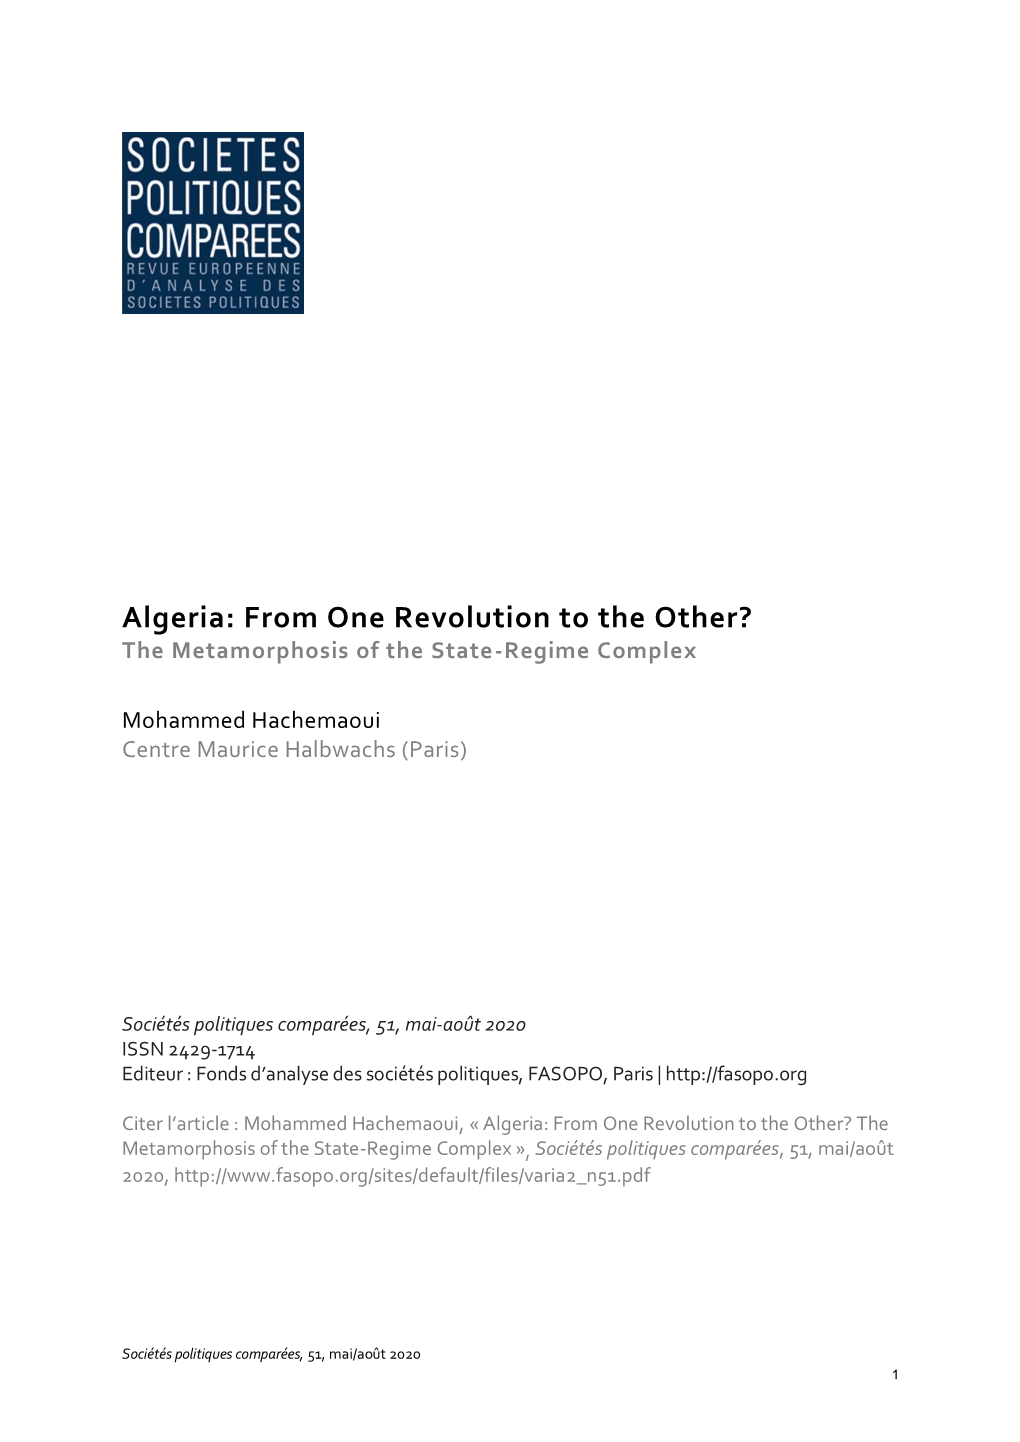 Algeria: from One Revolution to the Other? the Metamorphosis of the State-Regime Complex